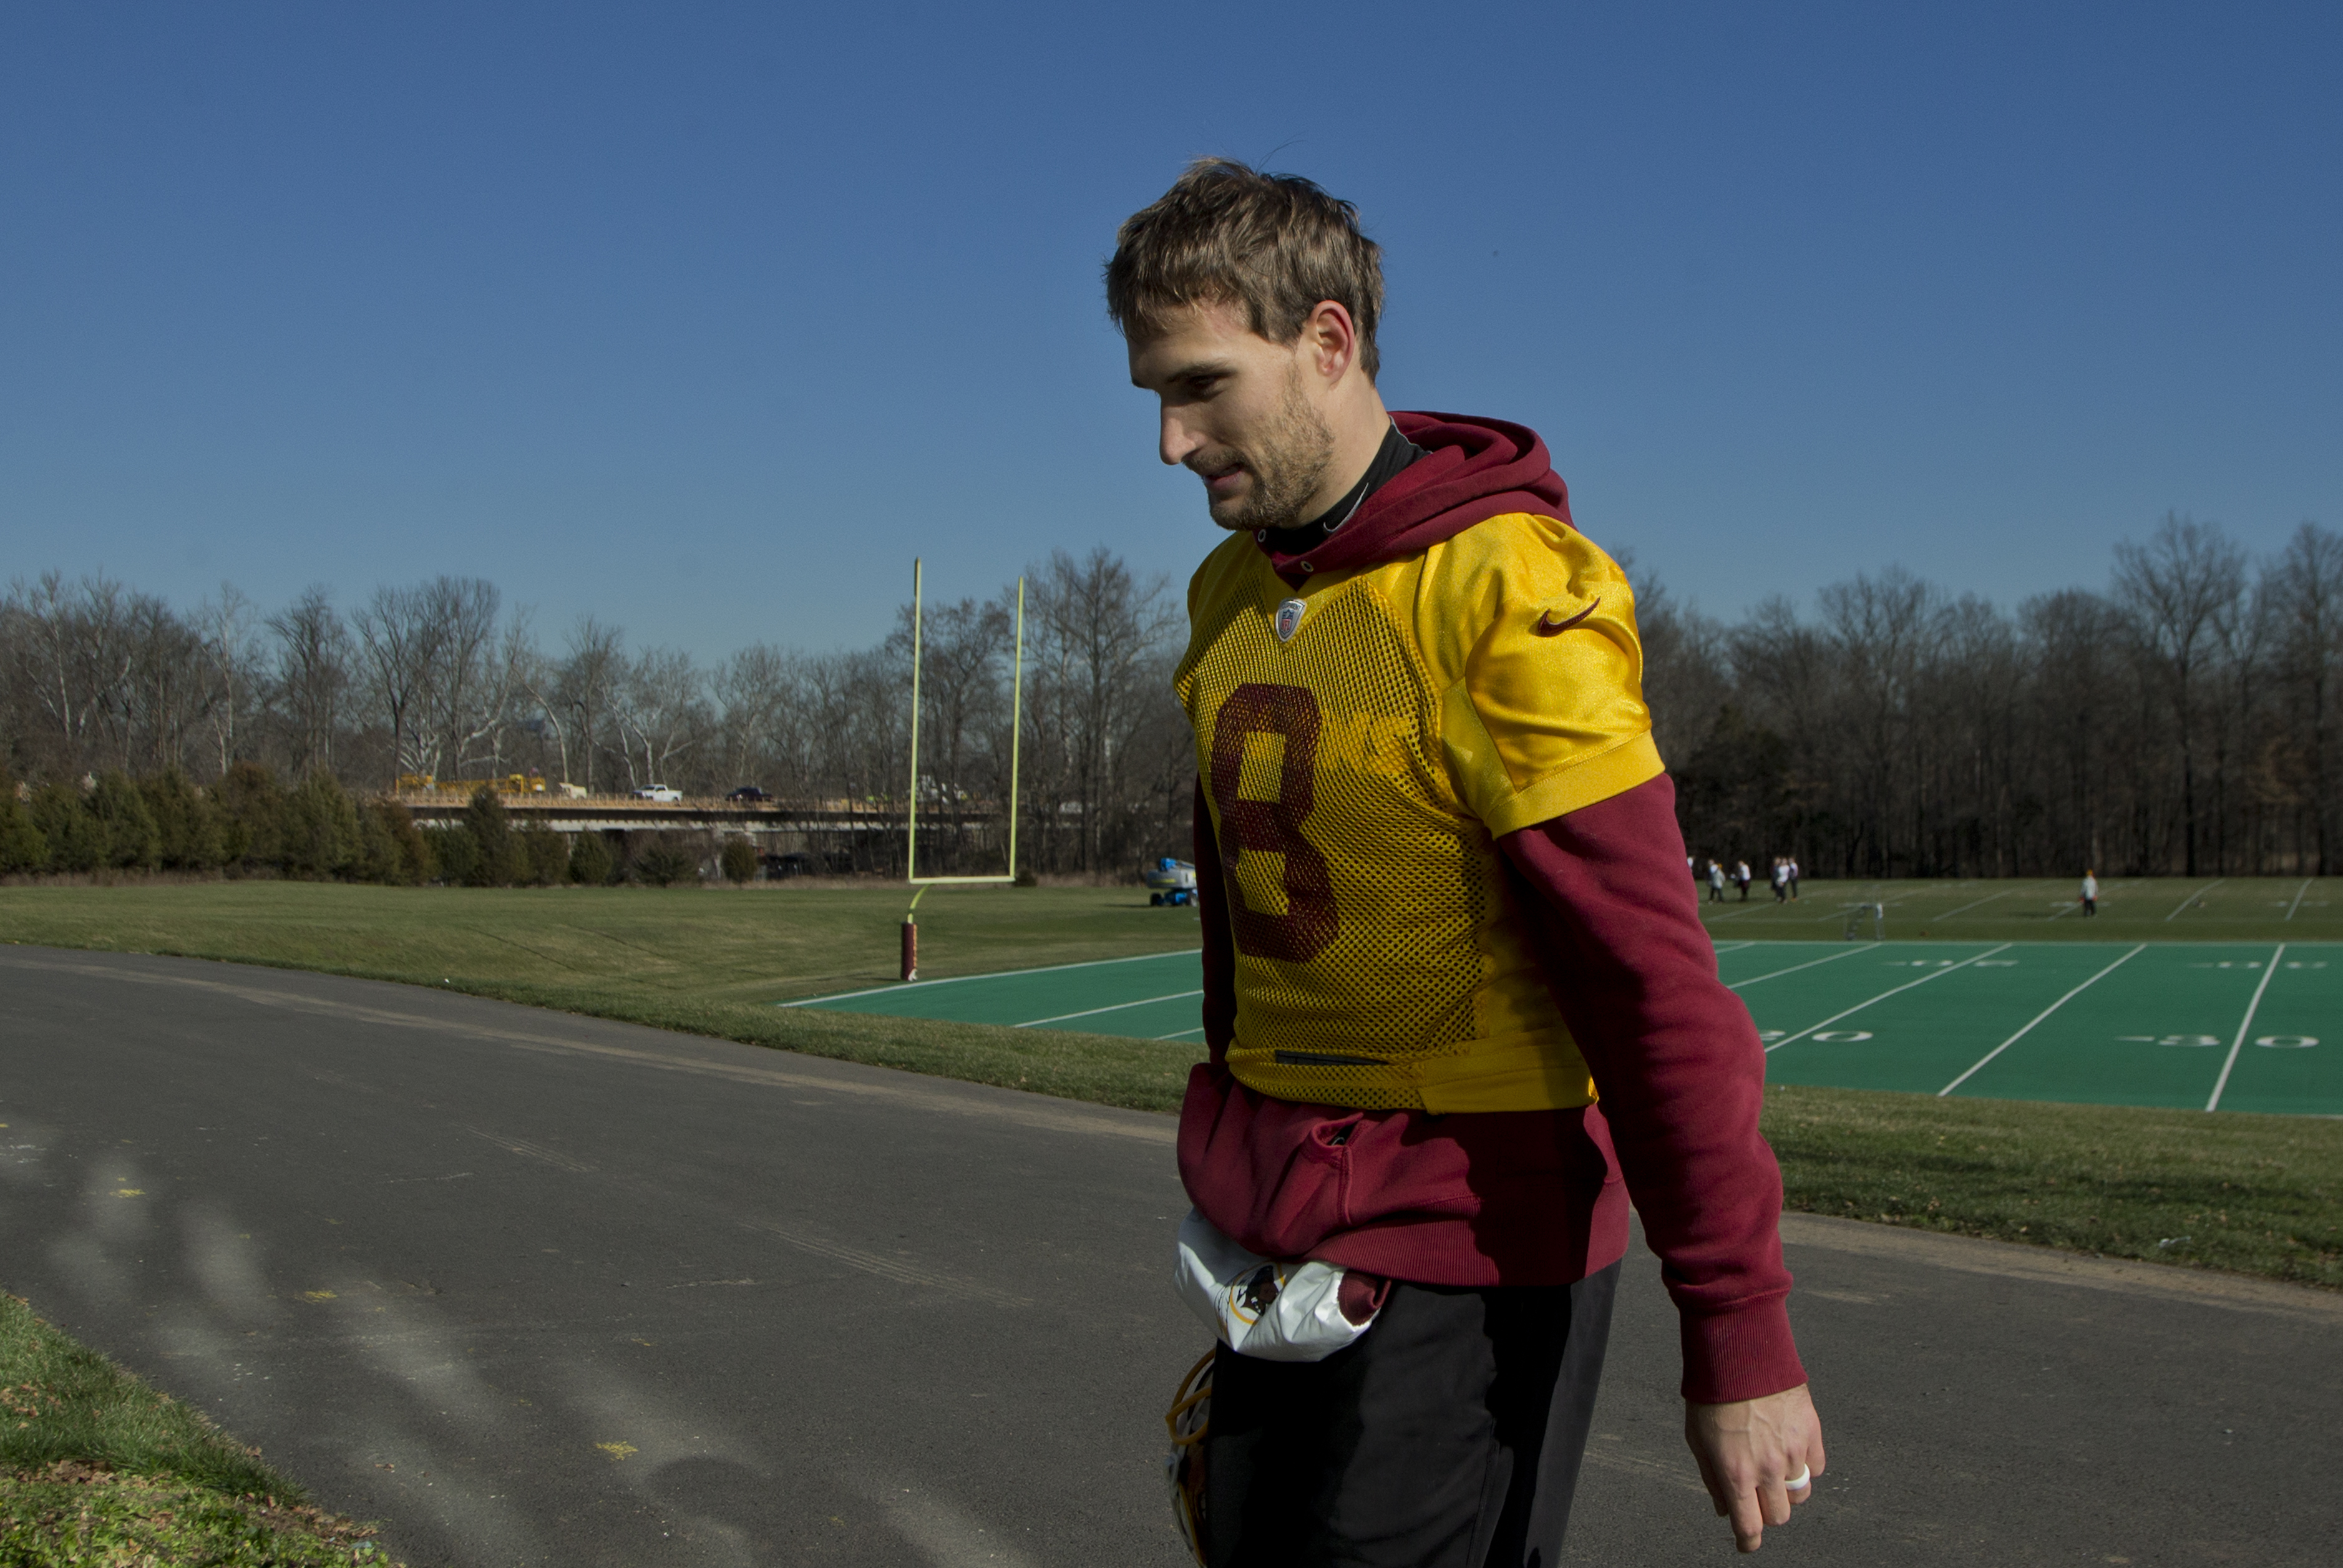 Why you should take financial advice from the Washington Redskins